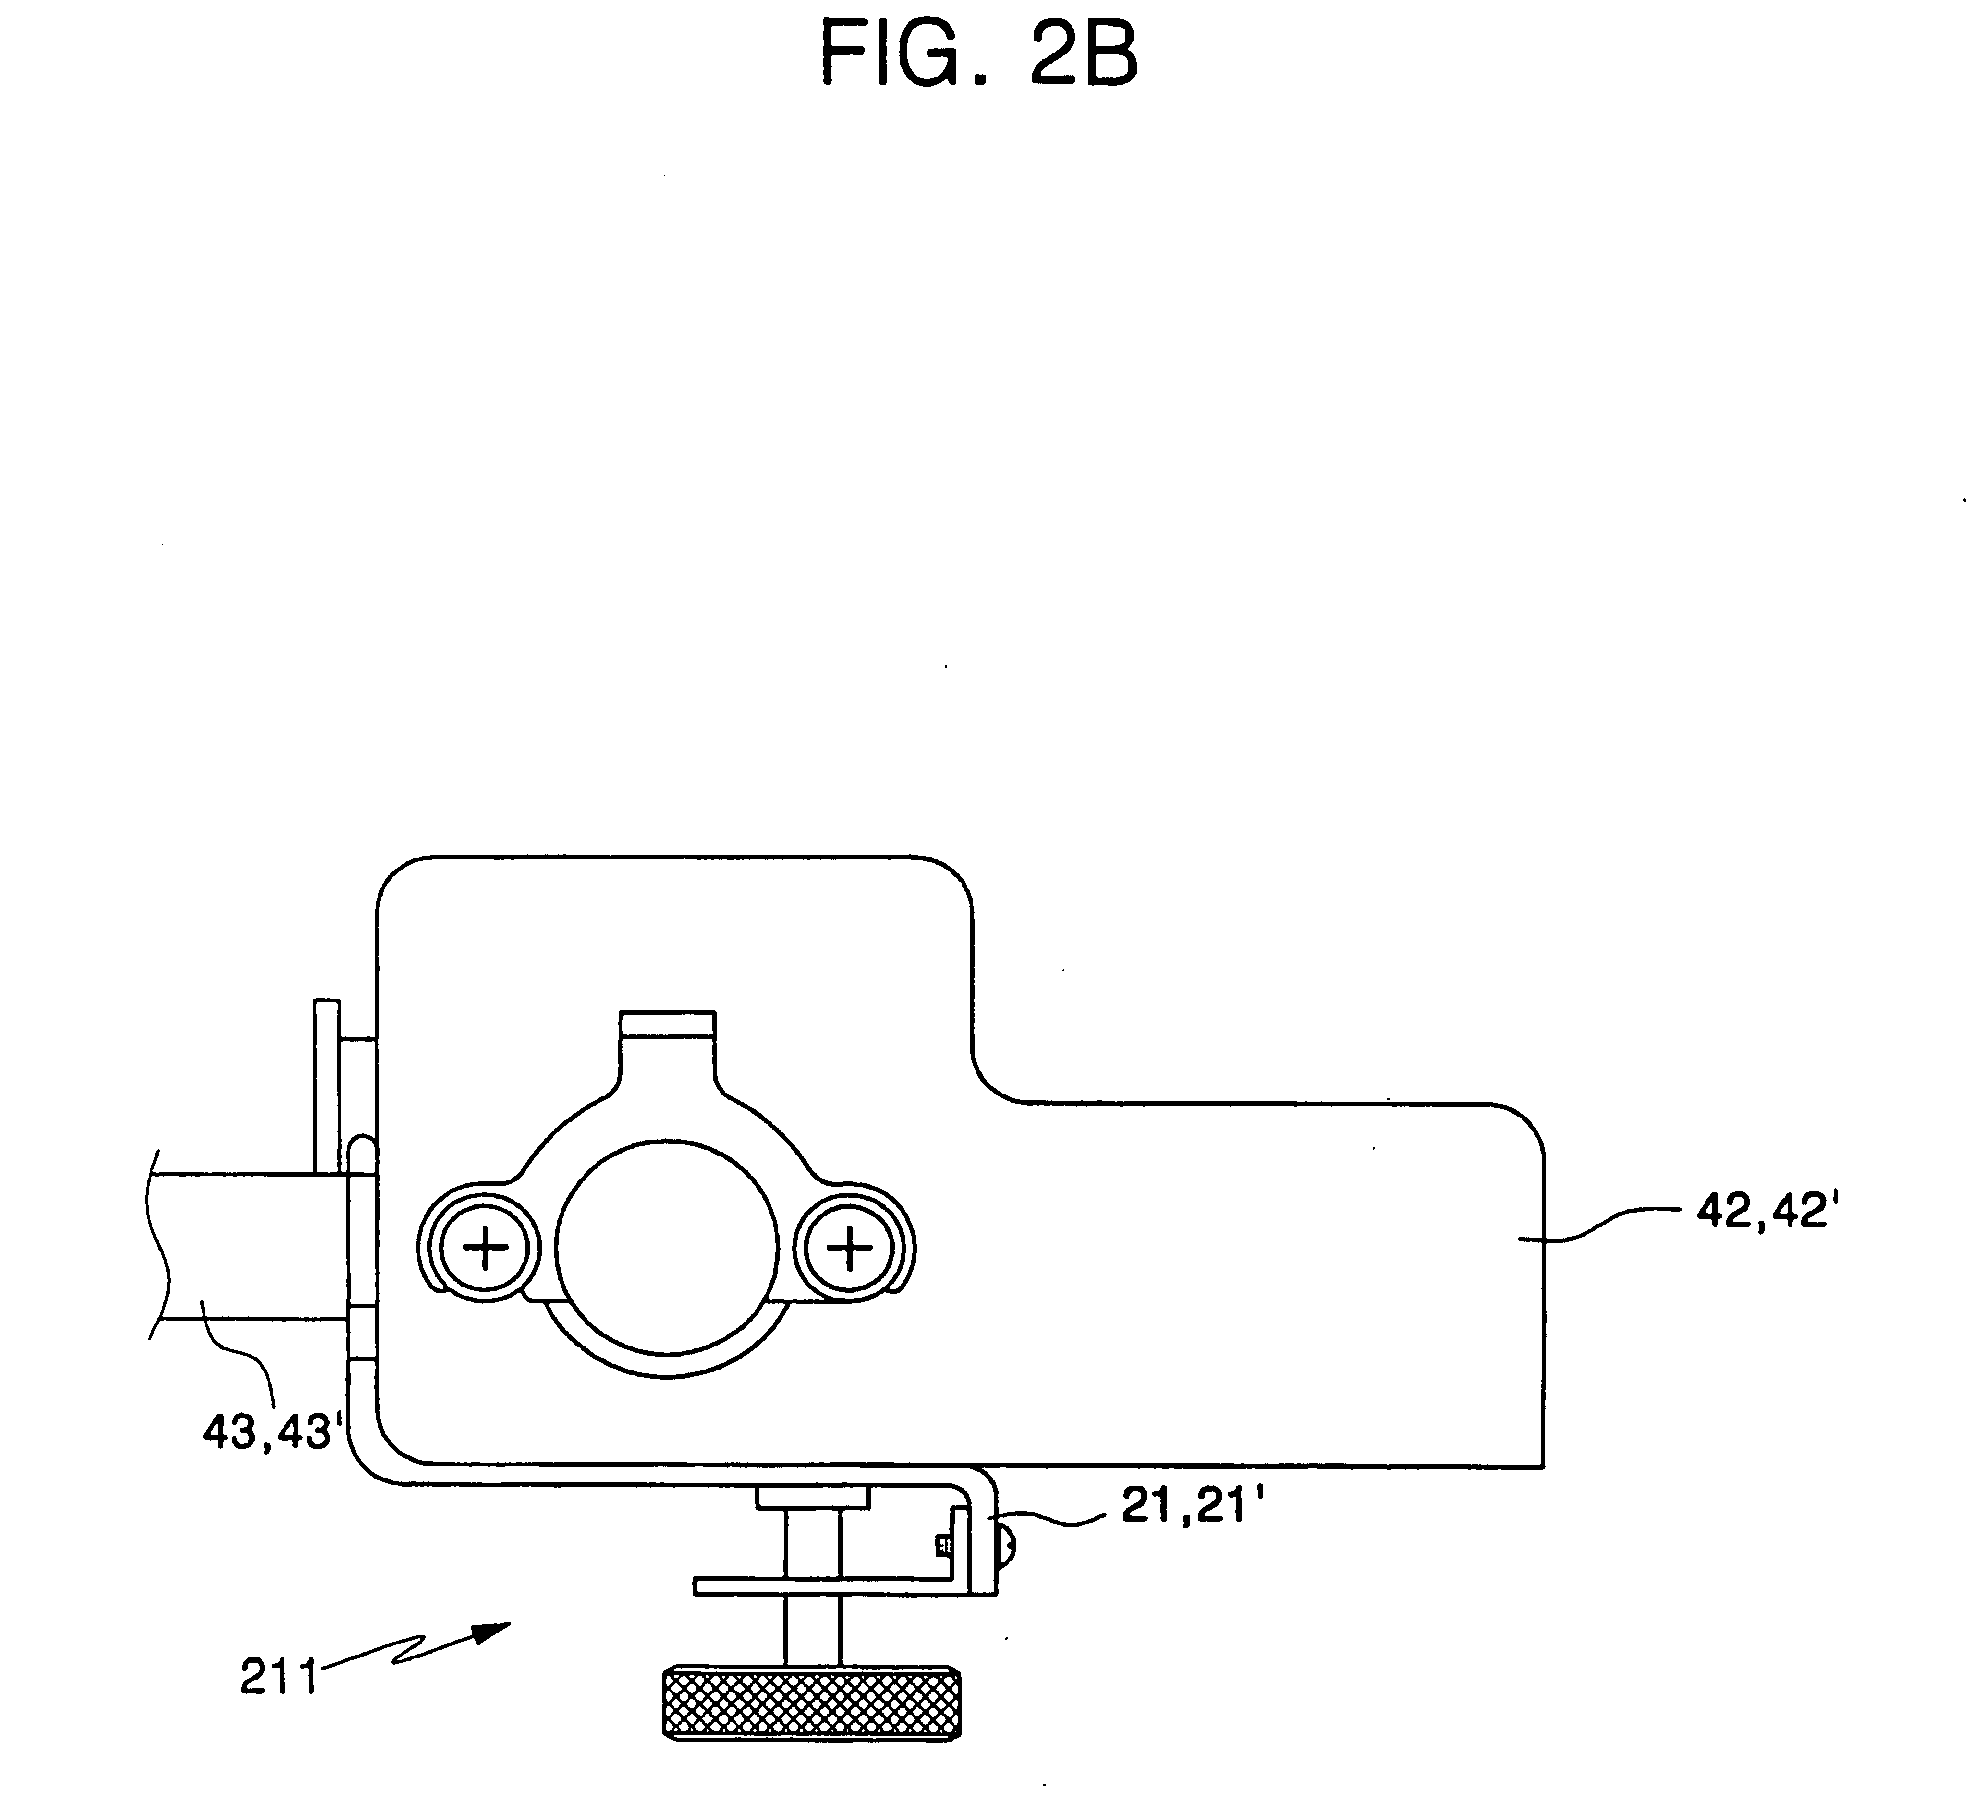 Apparatus for producing confectionery